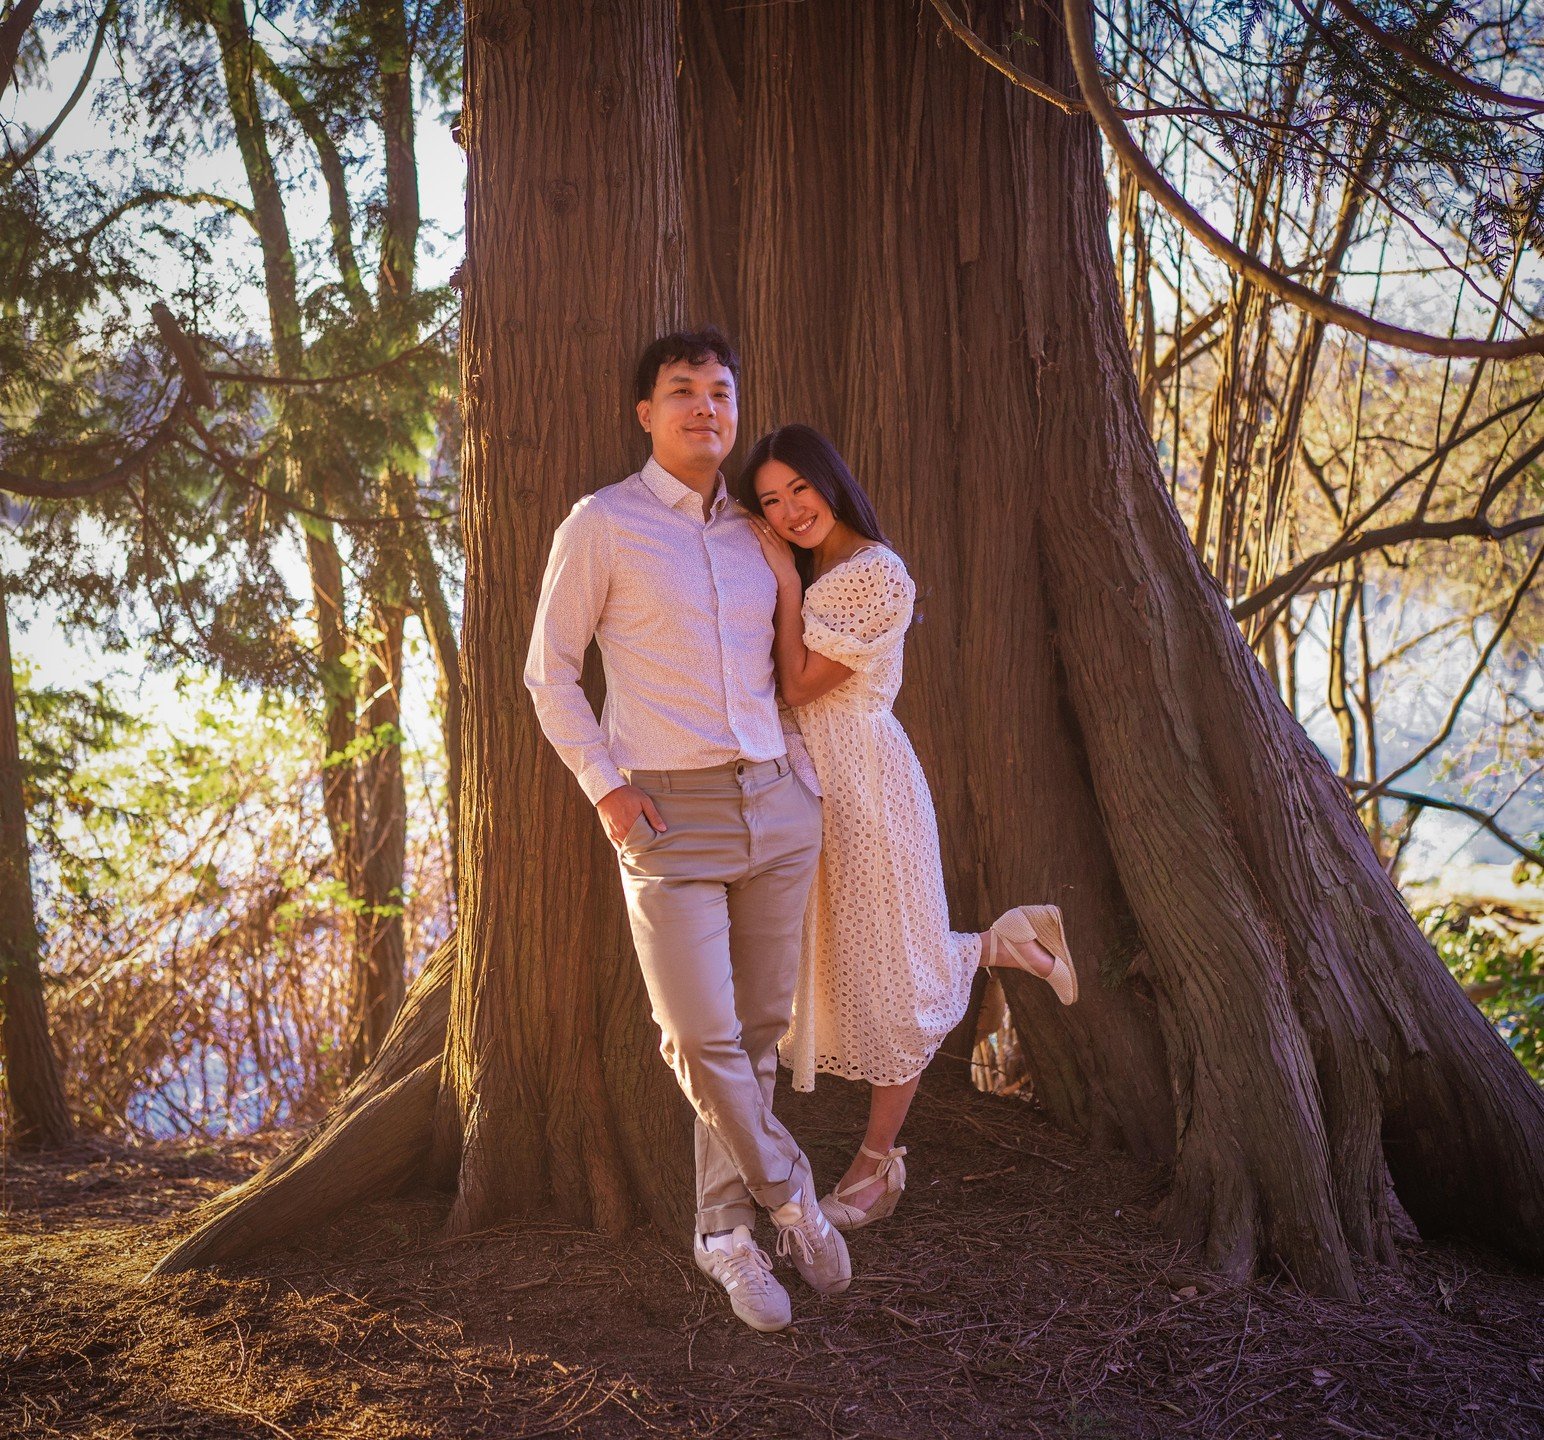 In life's weave, they're like tree roots, strong and connected.
.
.
.
.
.
.
.
.
.
.
.
#PortraitPhotography #BCPhotographers #LovePhotography #CouplesPhotography #BurnabyPhotography #VancouverPhotography #PortraitSession #PhotographyLovers #CaptureThe